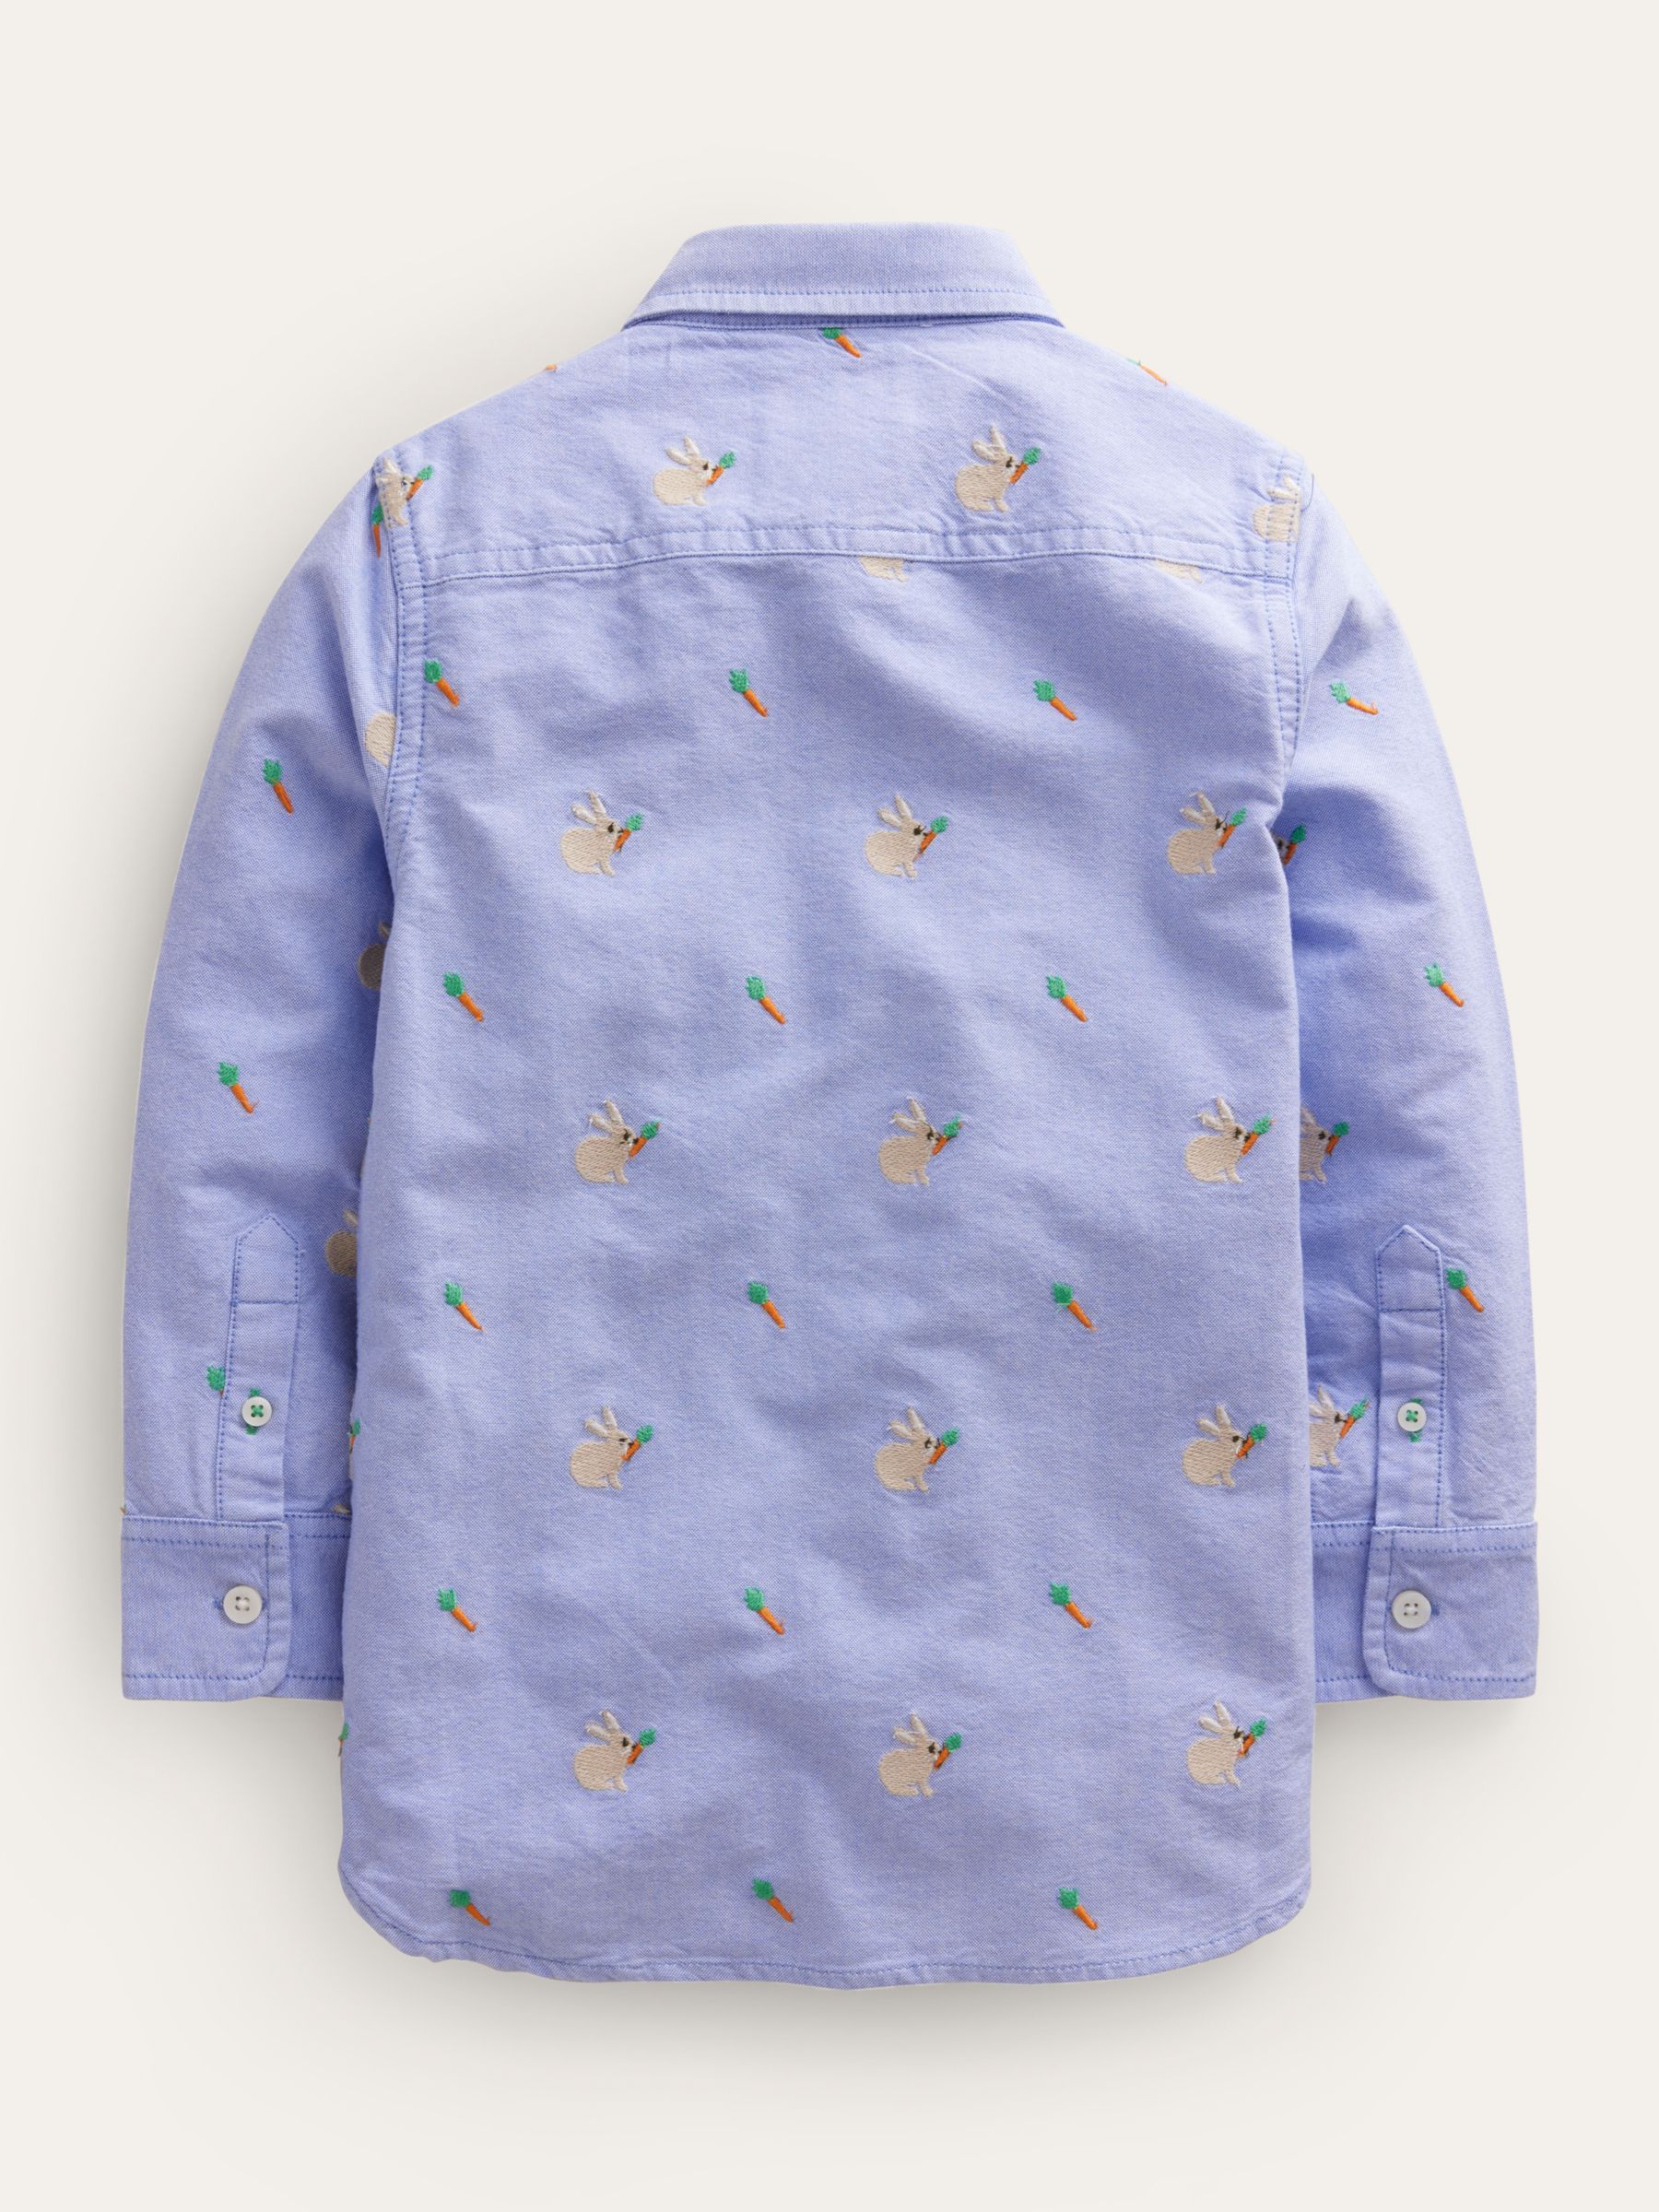 Buy Mini Boden Kids' Embroidered Bunny Oxford Shirt, Blue Online at johnlewis.com